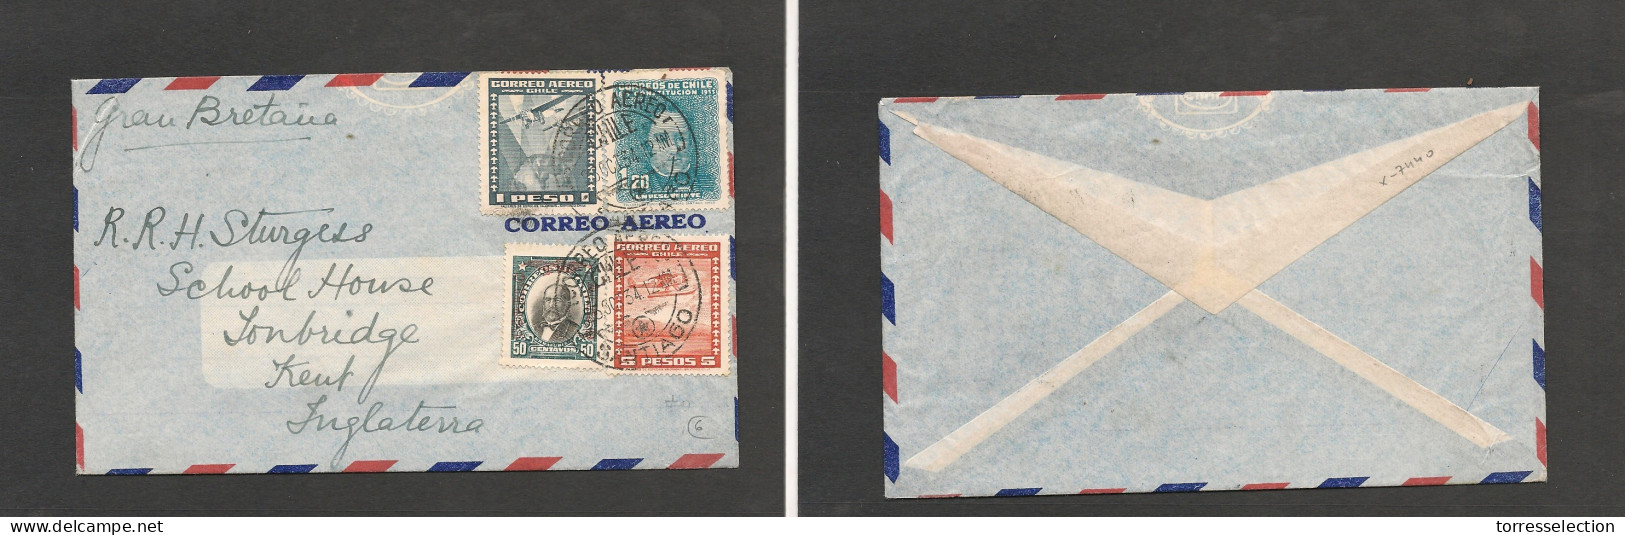 CHILE. Chile - Cover - 1934 23 Oct Stgo To UK Kent Air Mult Fkd Env Air France 27 Oct. Fine. Ex-Prof West UK Airmails Co - Chili